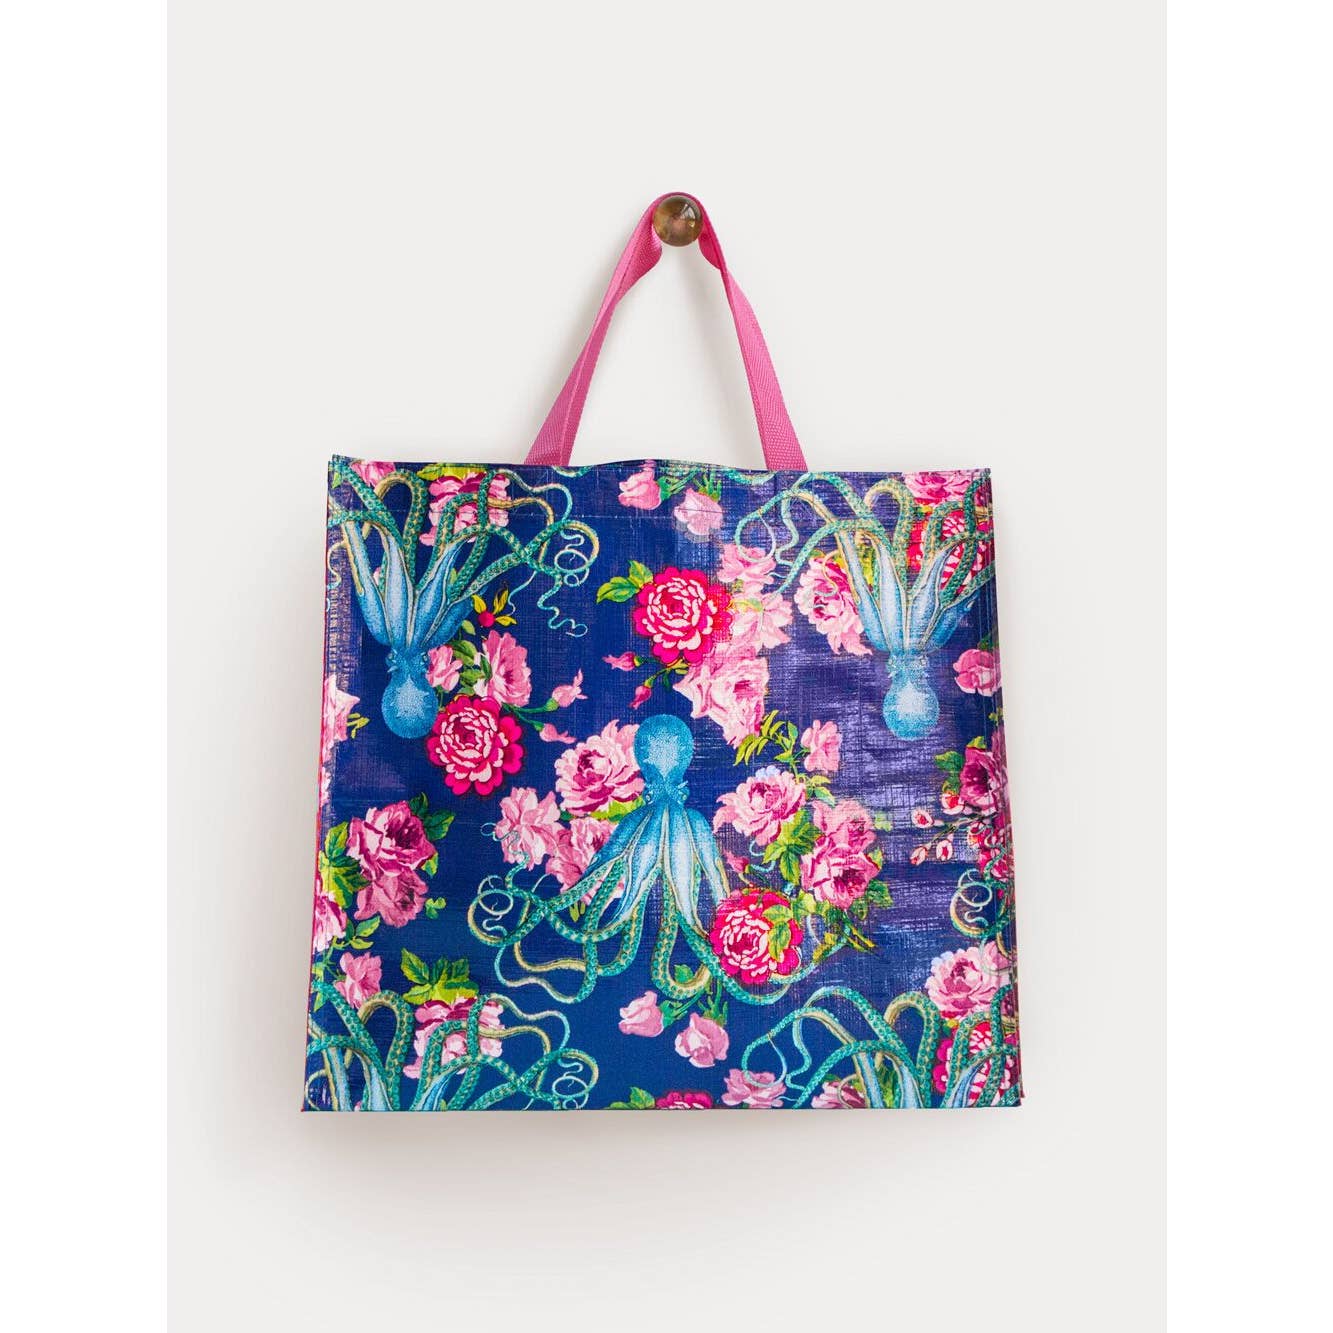 Market tote bag with flowers and sea creatures